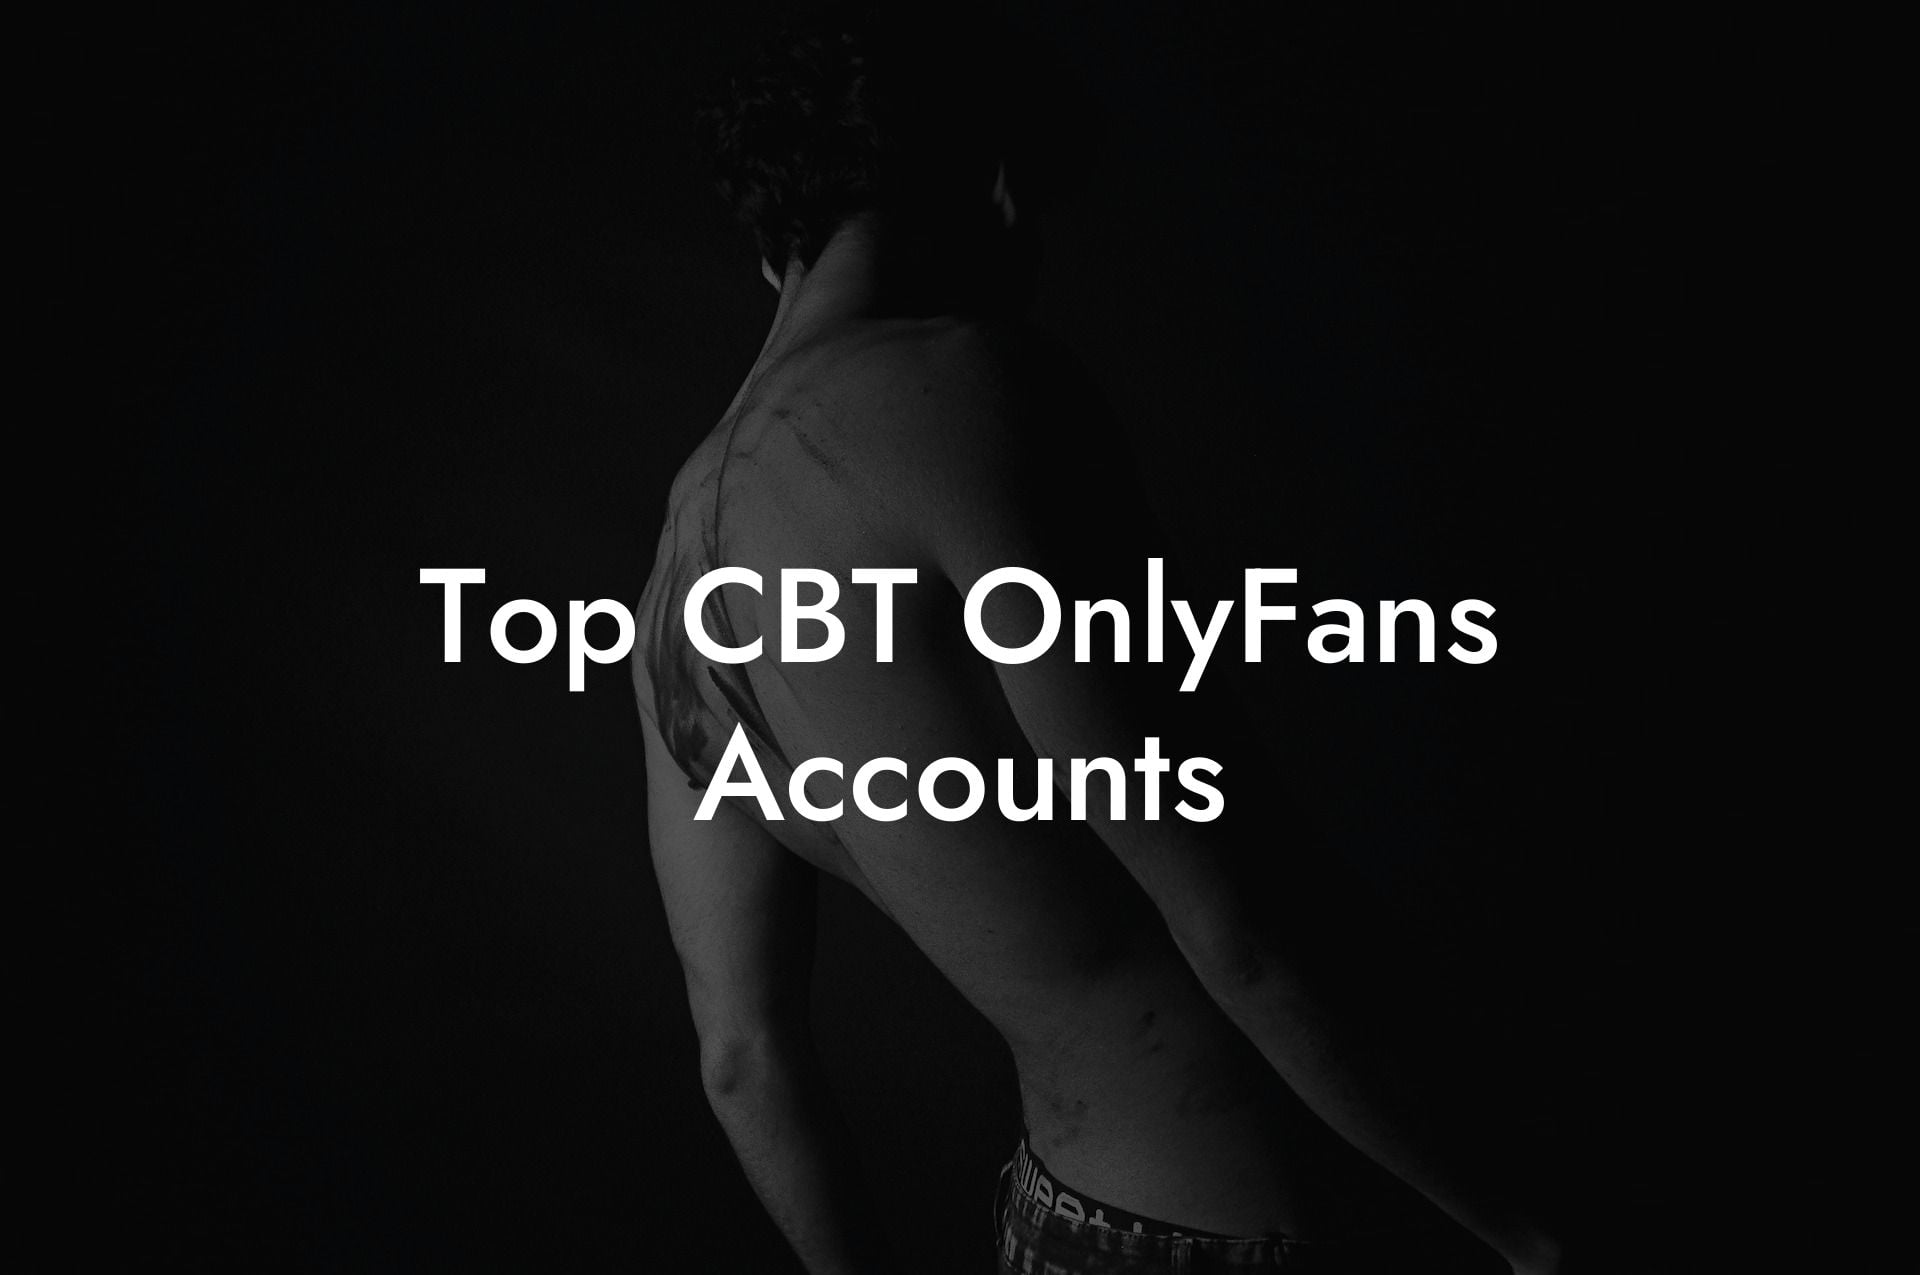 Top CBT OnlyFans Accounts